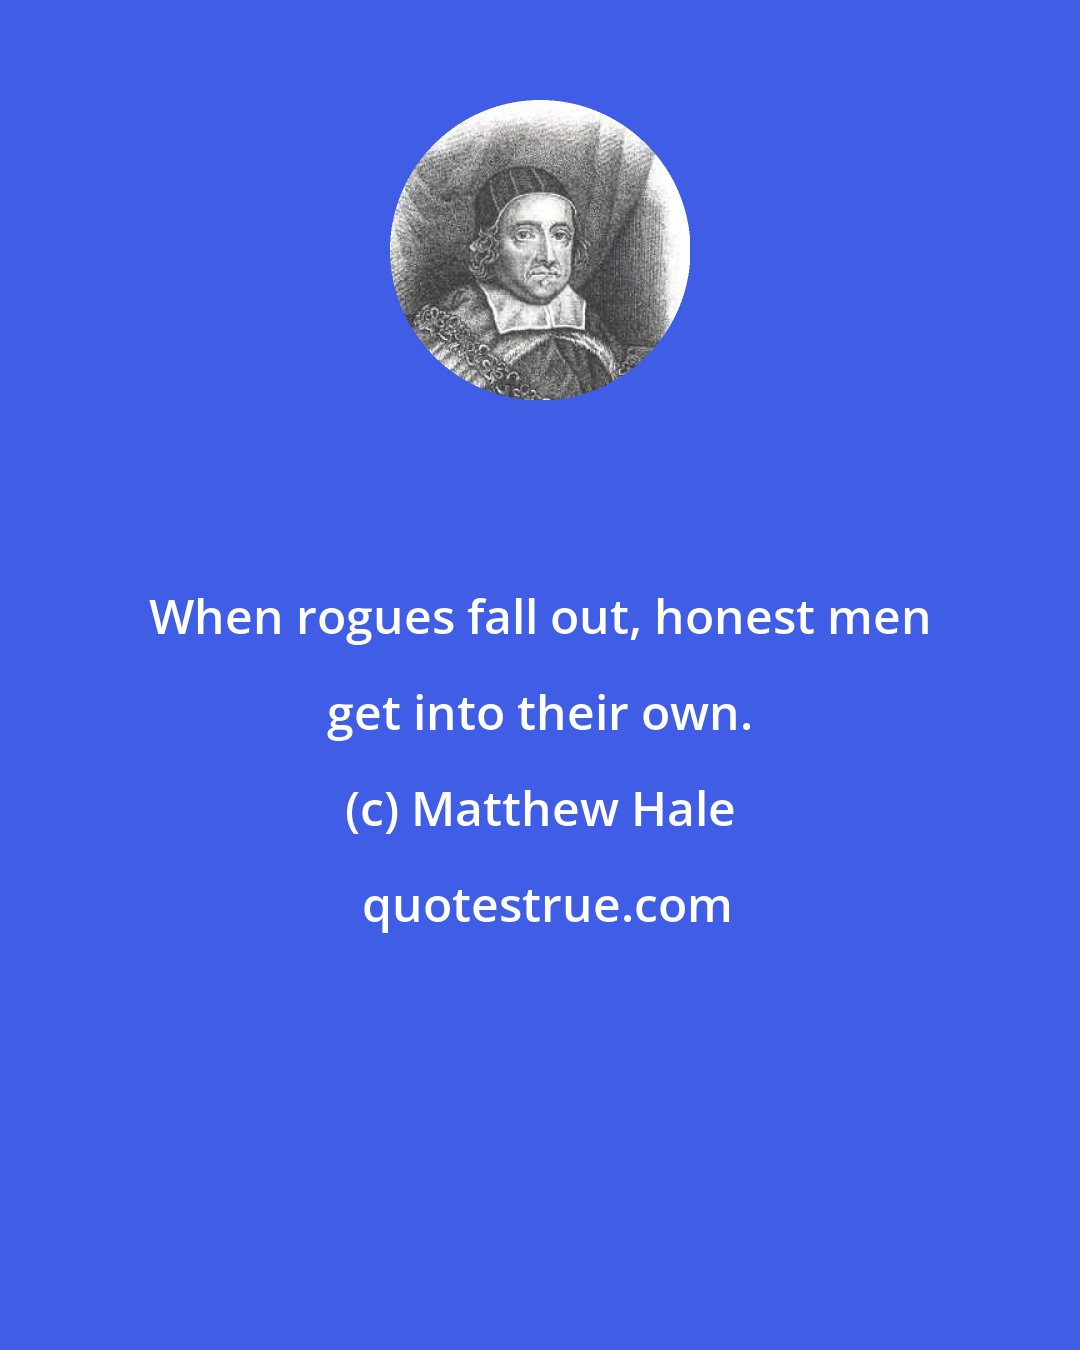 Matthew Hale: When rogues fall out, honest men get into their own.